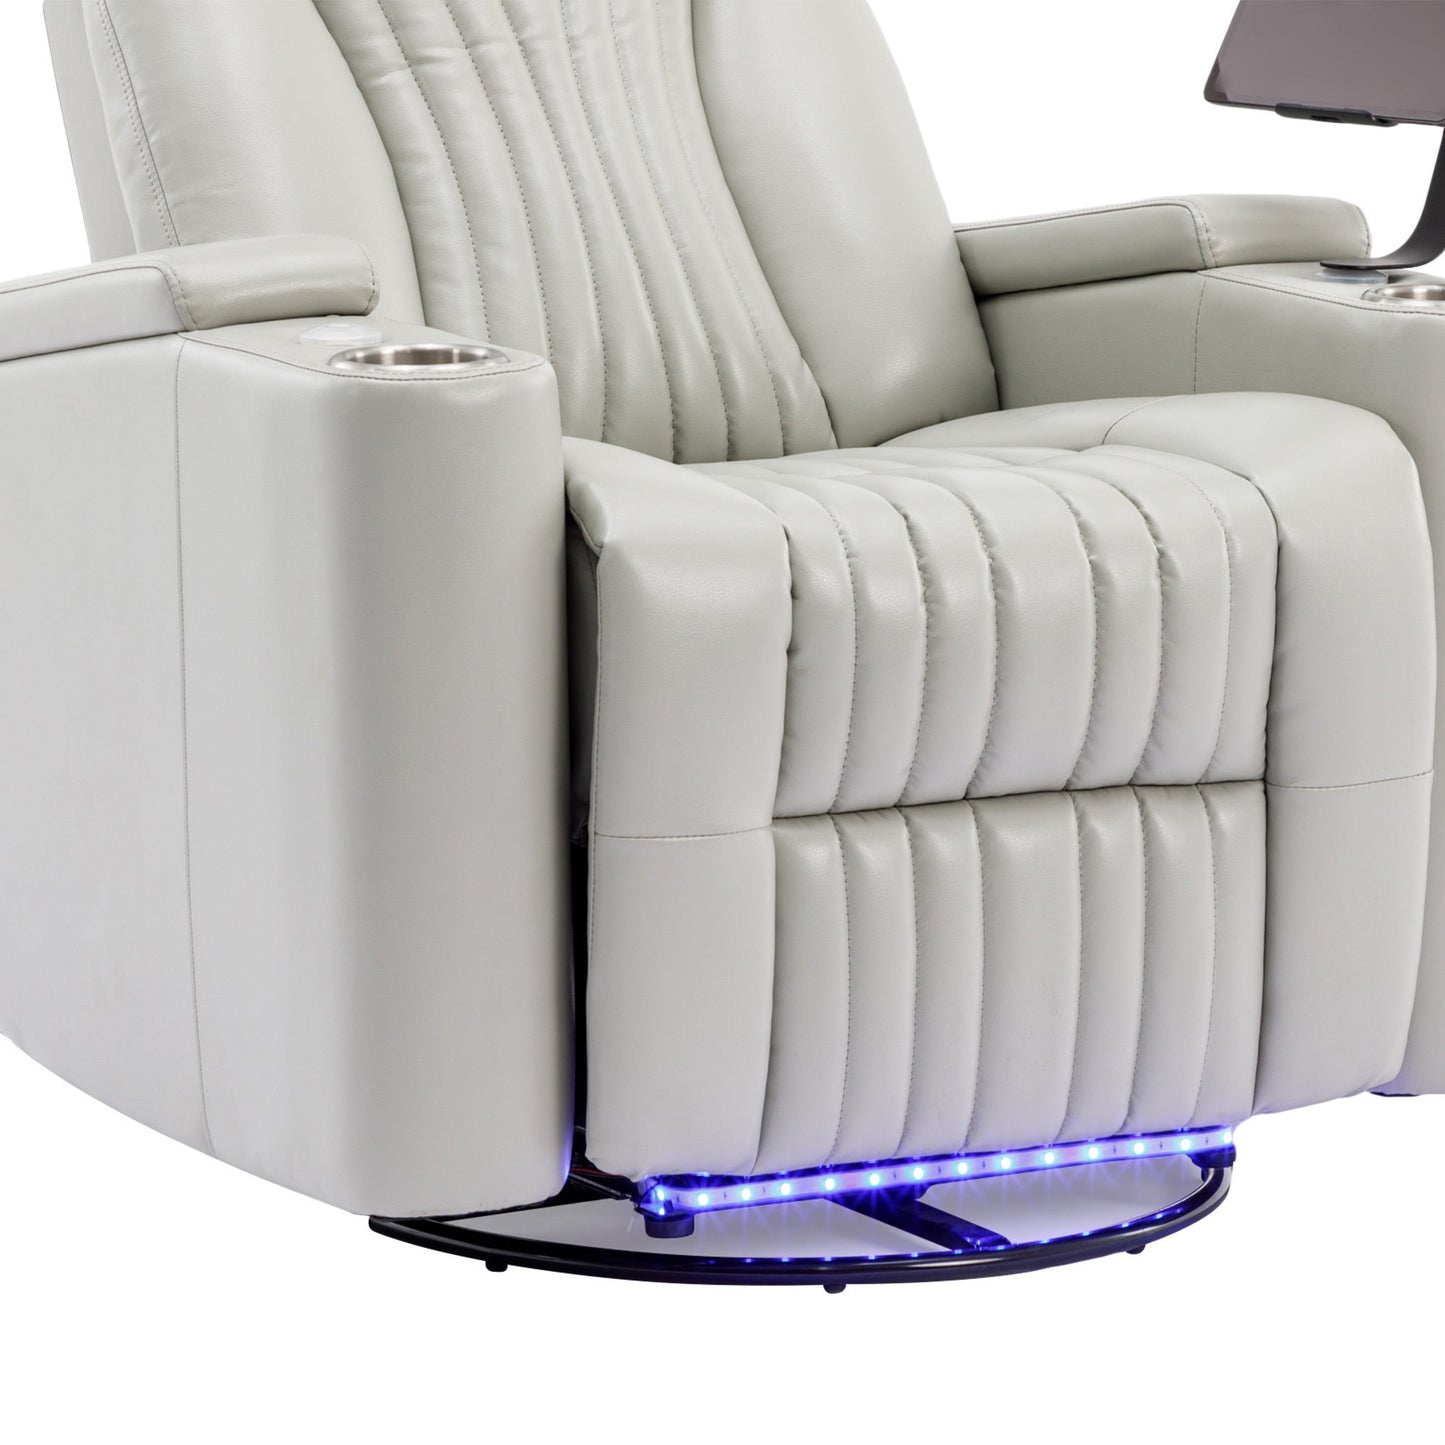 270° Power Swivel Recliner,Home Theater Seating With Hidden Arm Storage and  LED Light Strip,Cup Holder,360° Swivel Tray Table,and Cell Phone Holder,Soft Living Room Chair,Grey